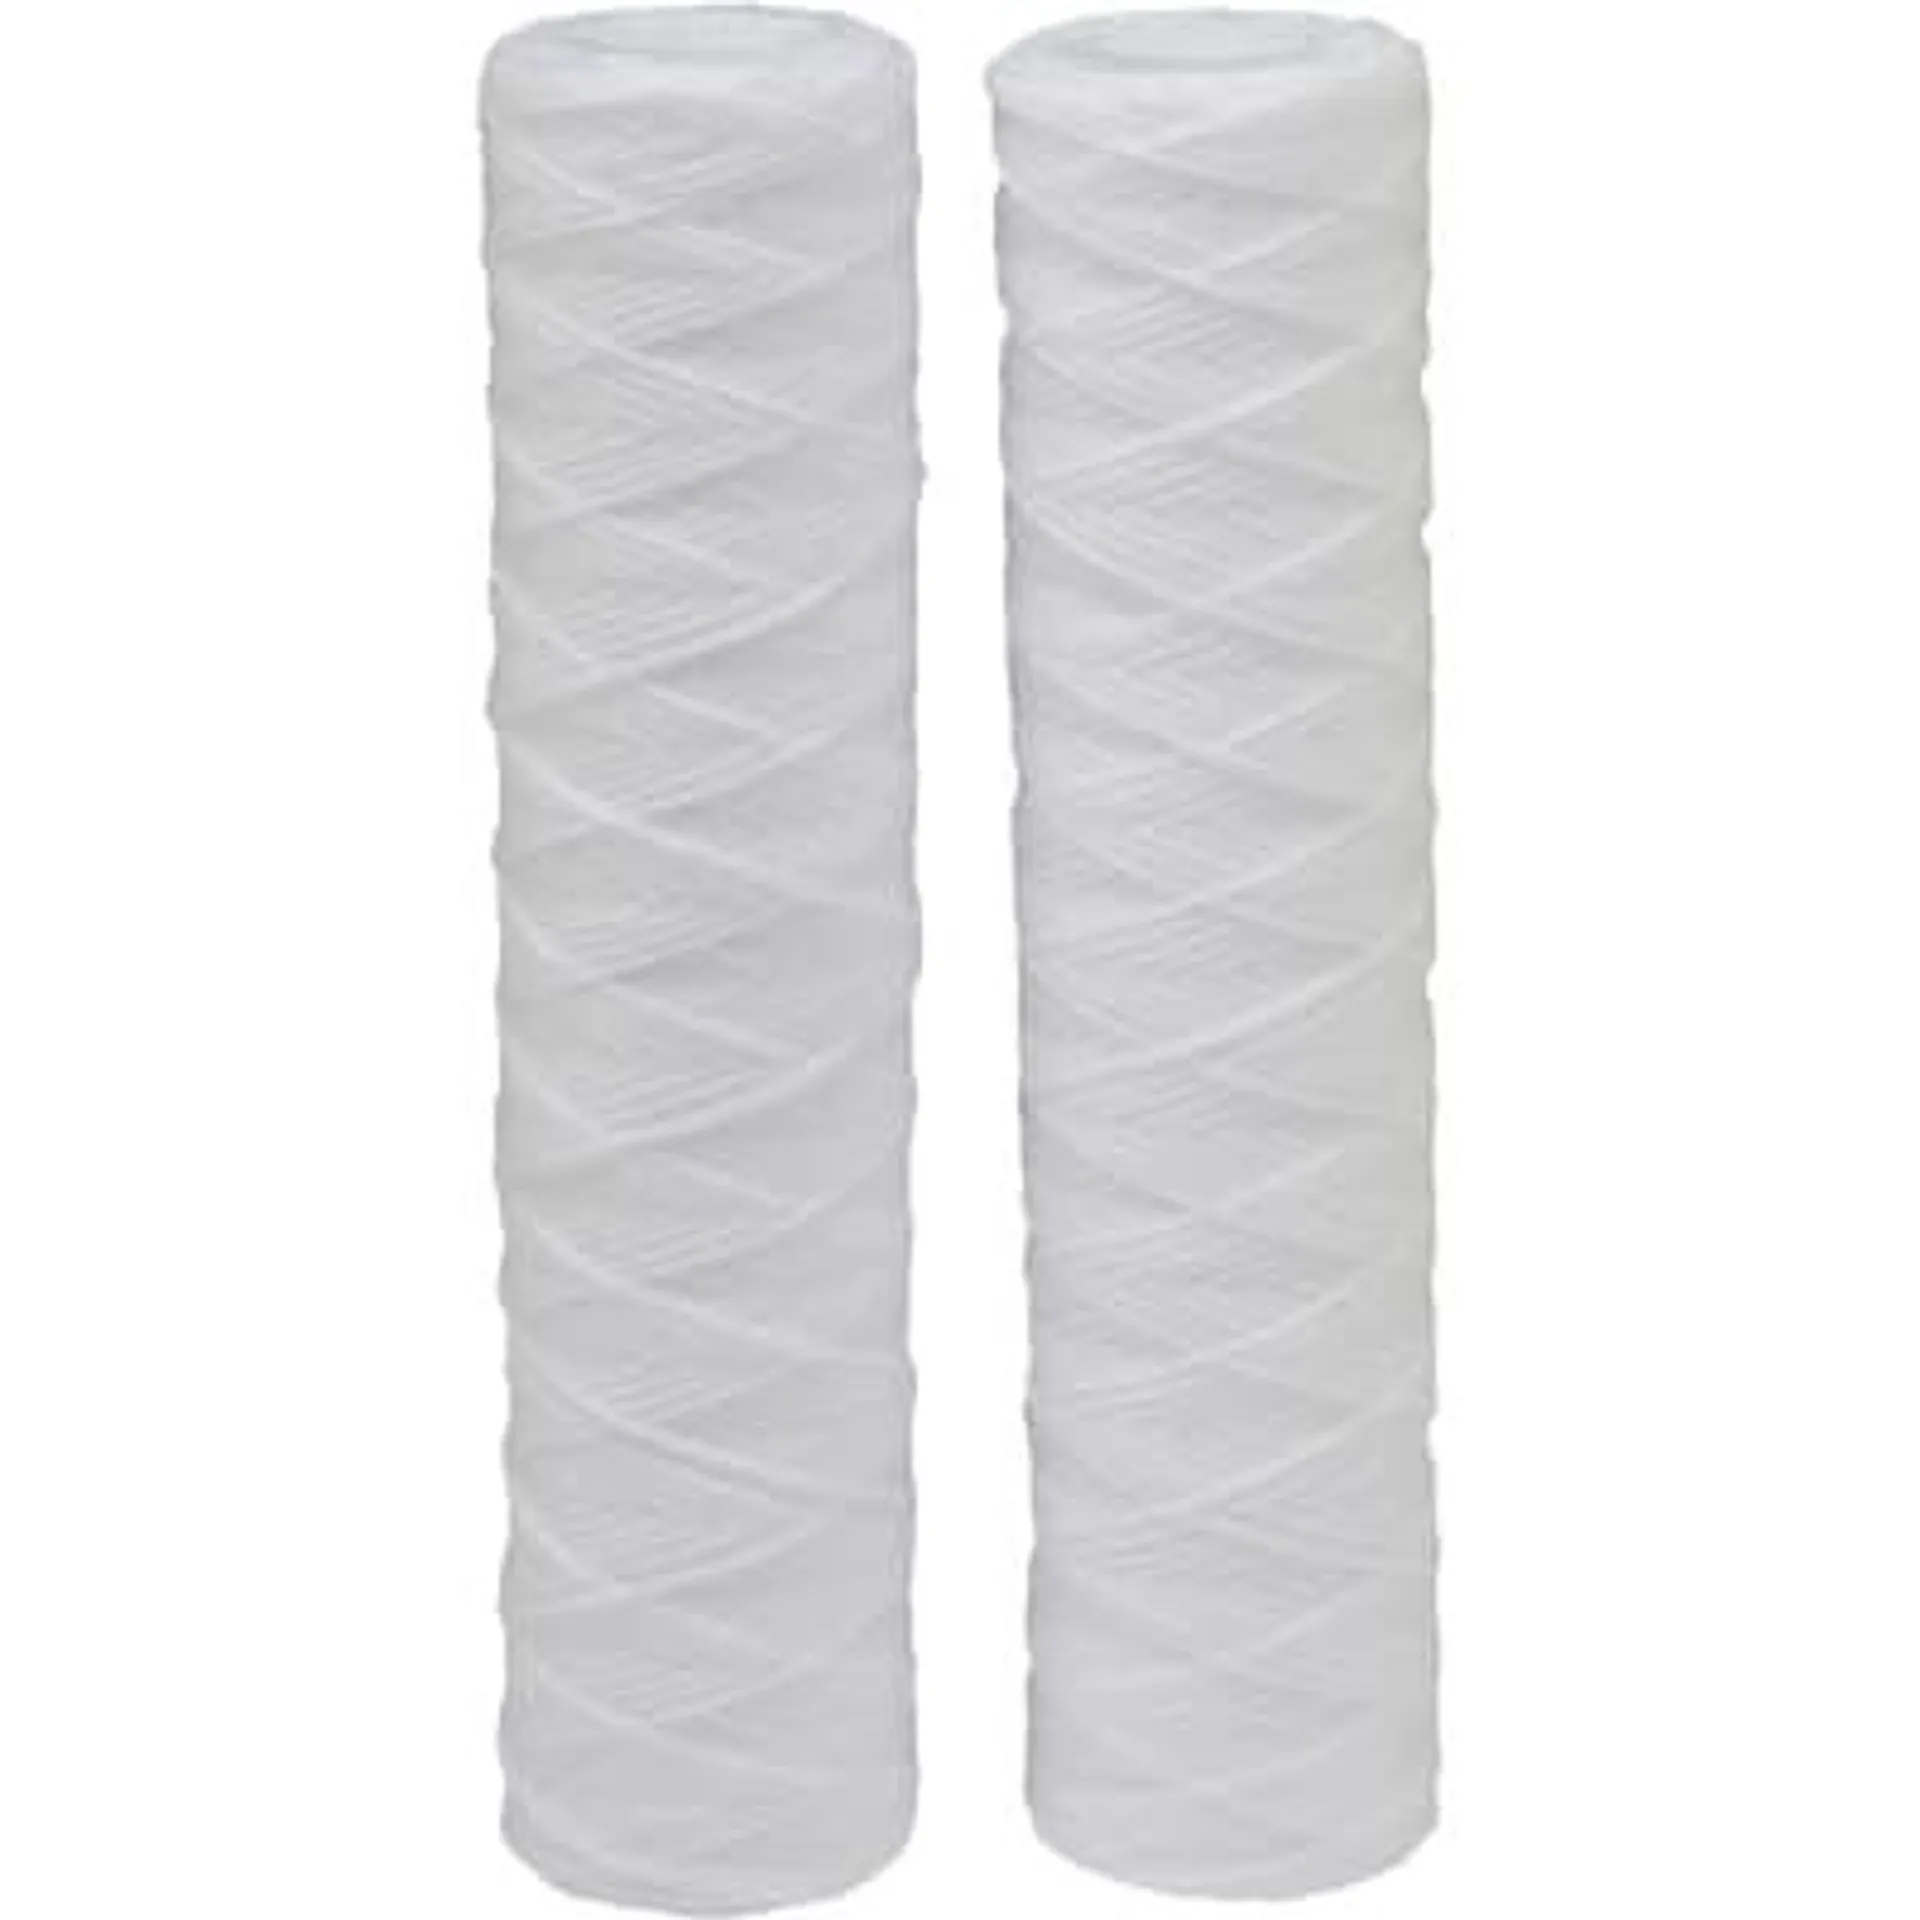 EcoPure String Wound Universal Whole Home Filter - 2 Pk